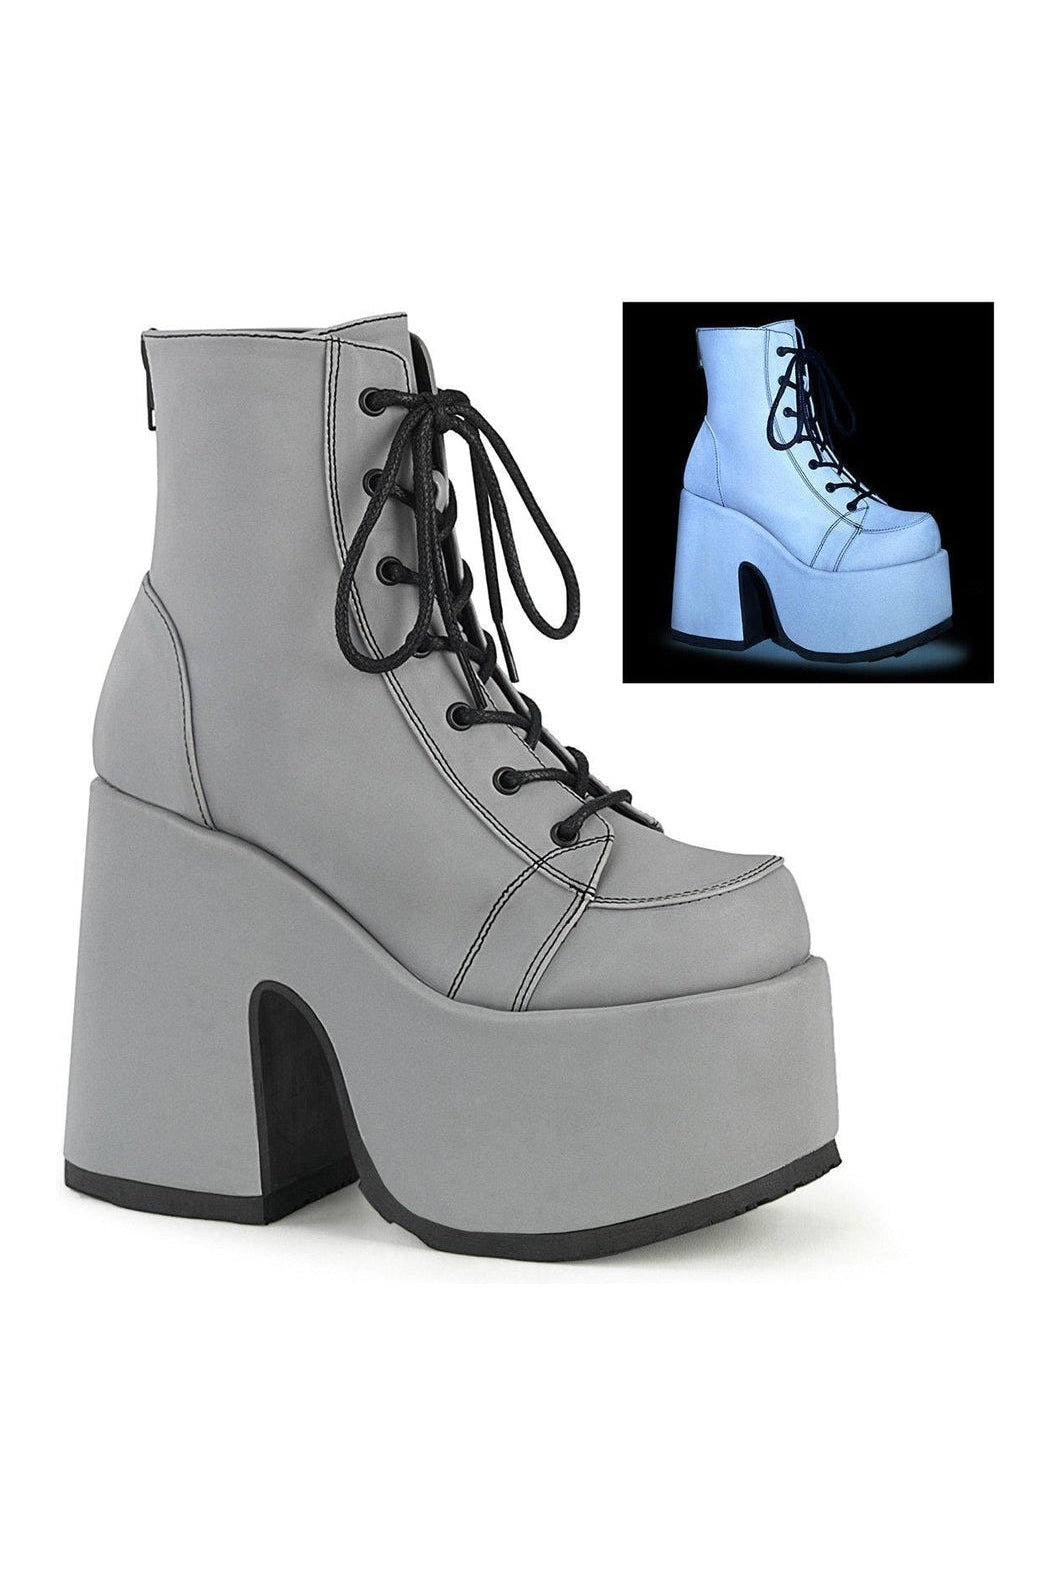 CAMEL-203 Ankle Boot | Grey Faux Leather-Ankle Boots-Demonia-SEXYSHOES.COM